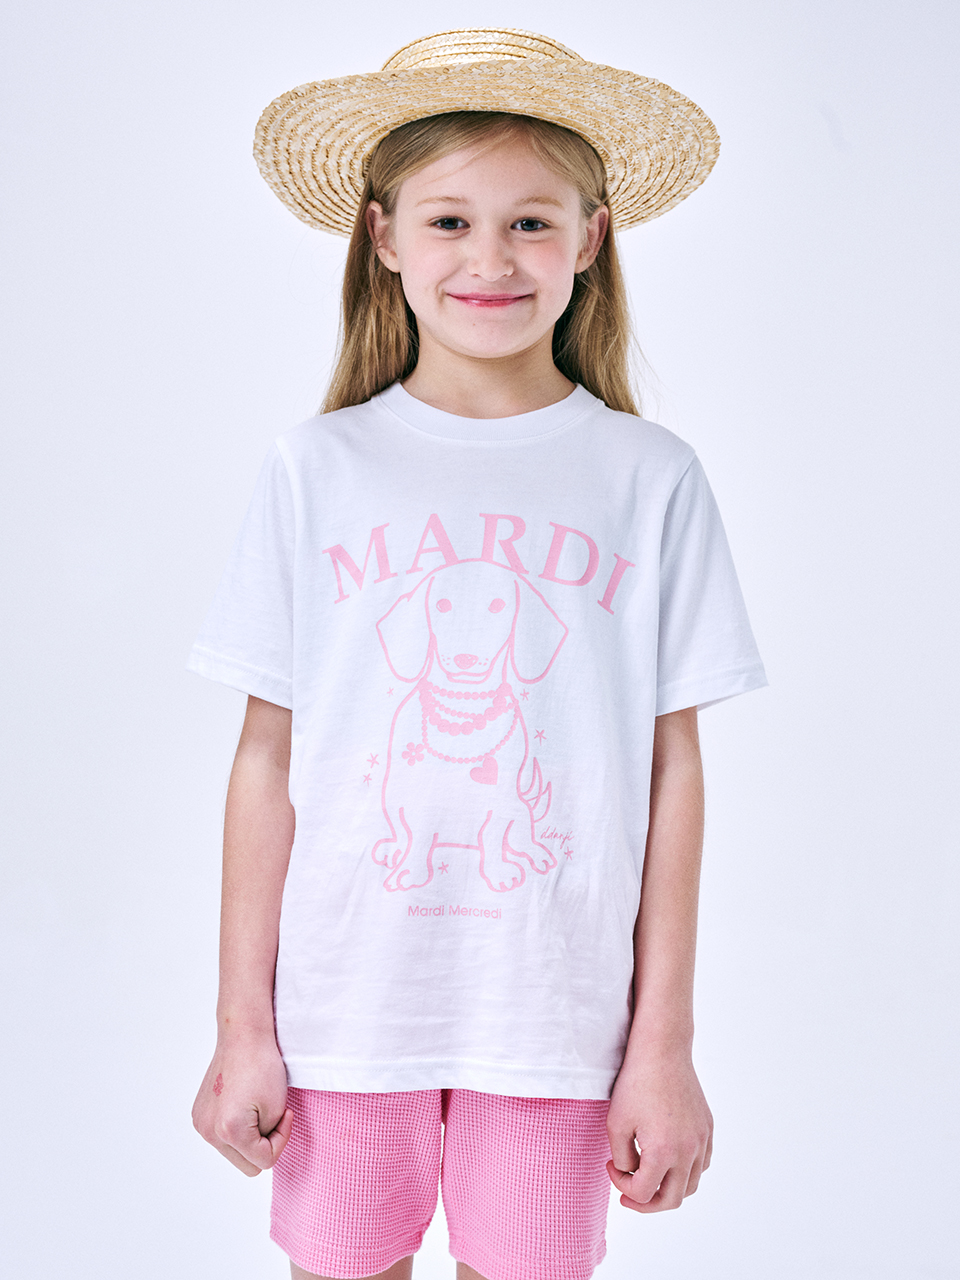 KIDS TSHIRT PEARL NECKLACE SWING THE TAIL DDANJI_WHITE PINK